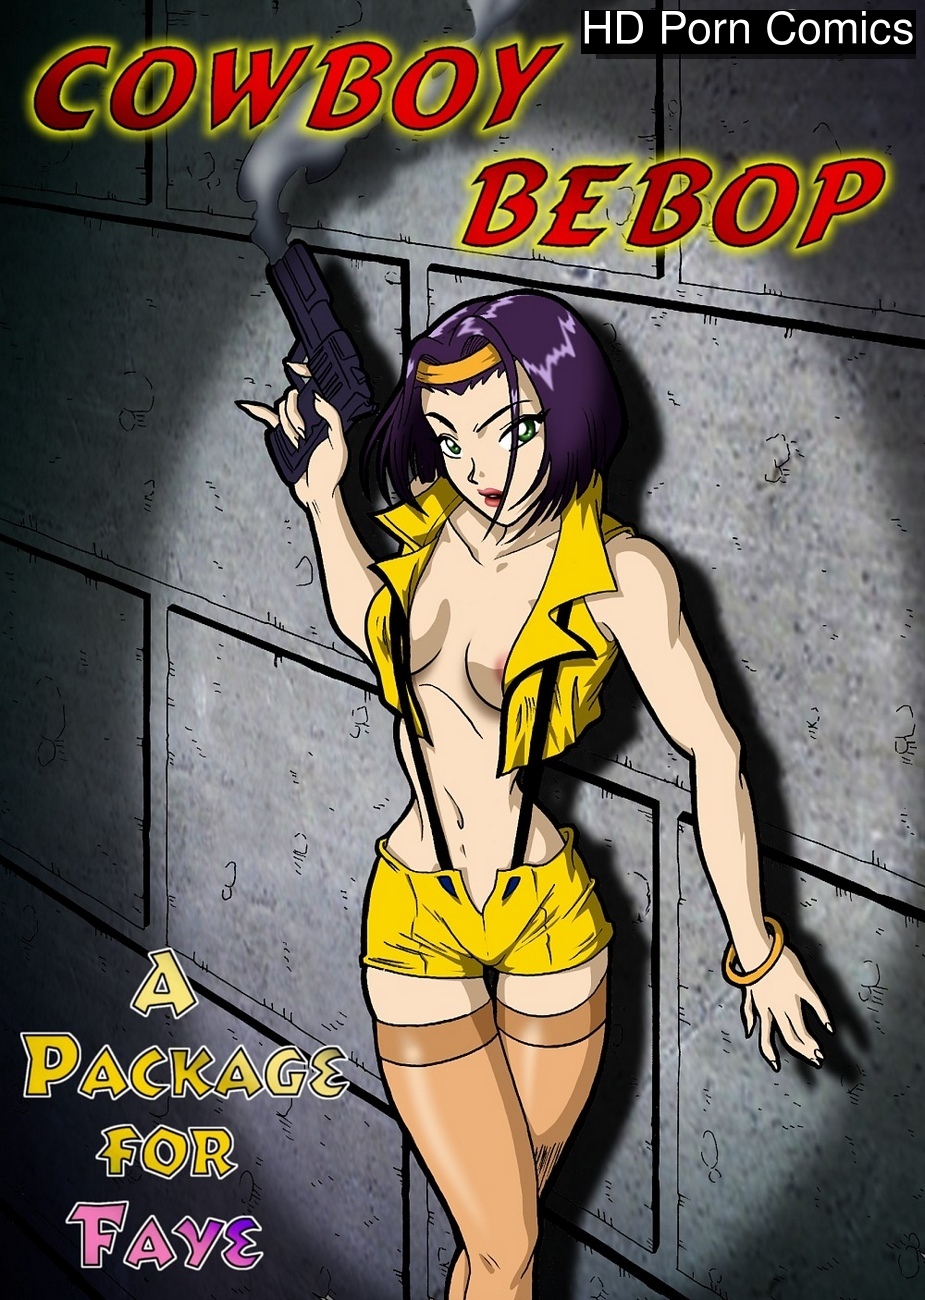 A Package For Faye comic porn - HD Porn Comics